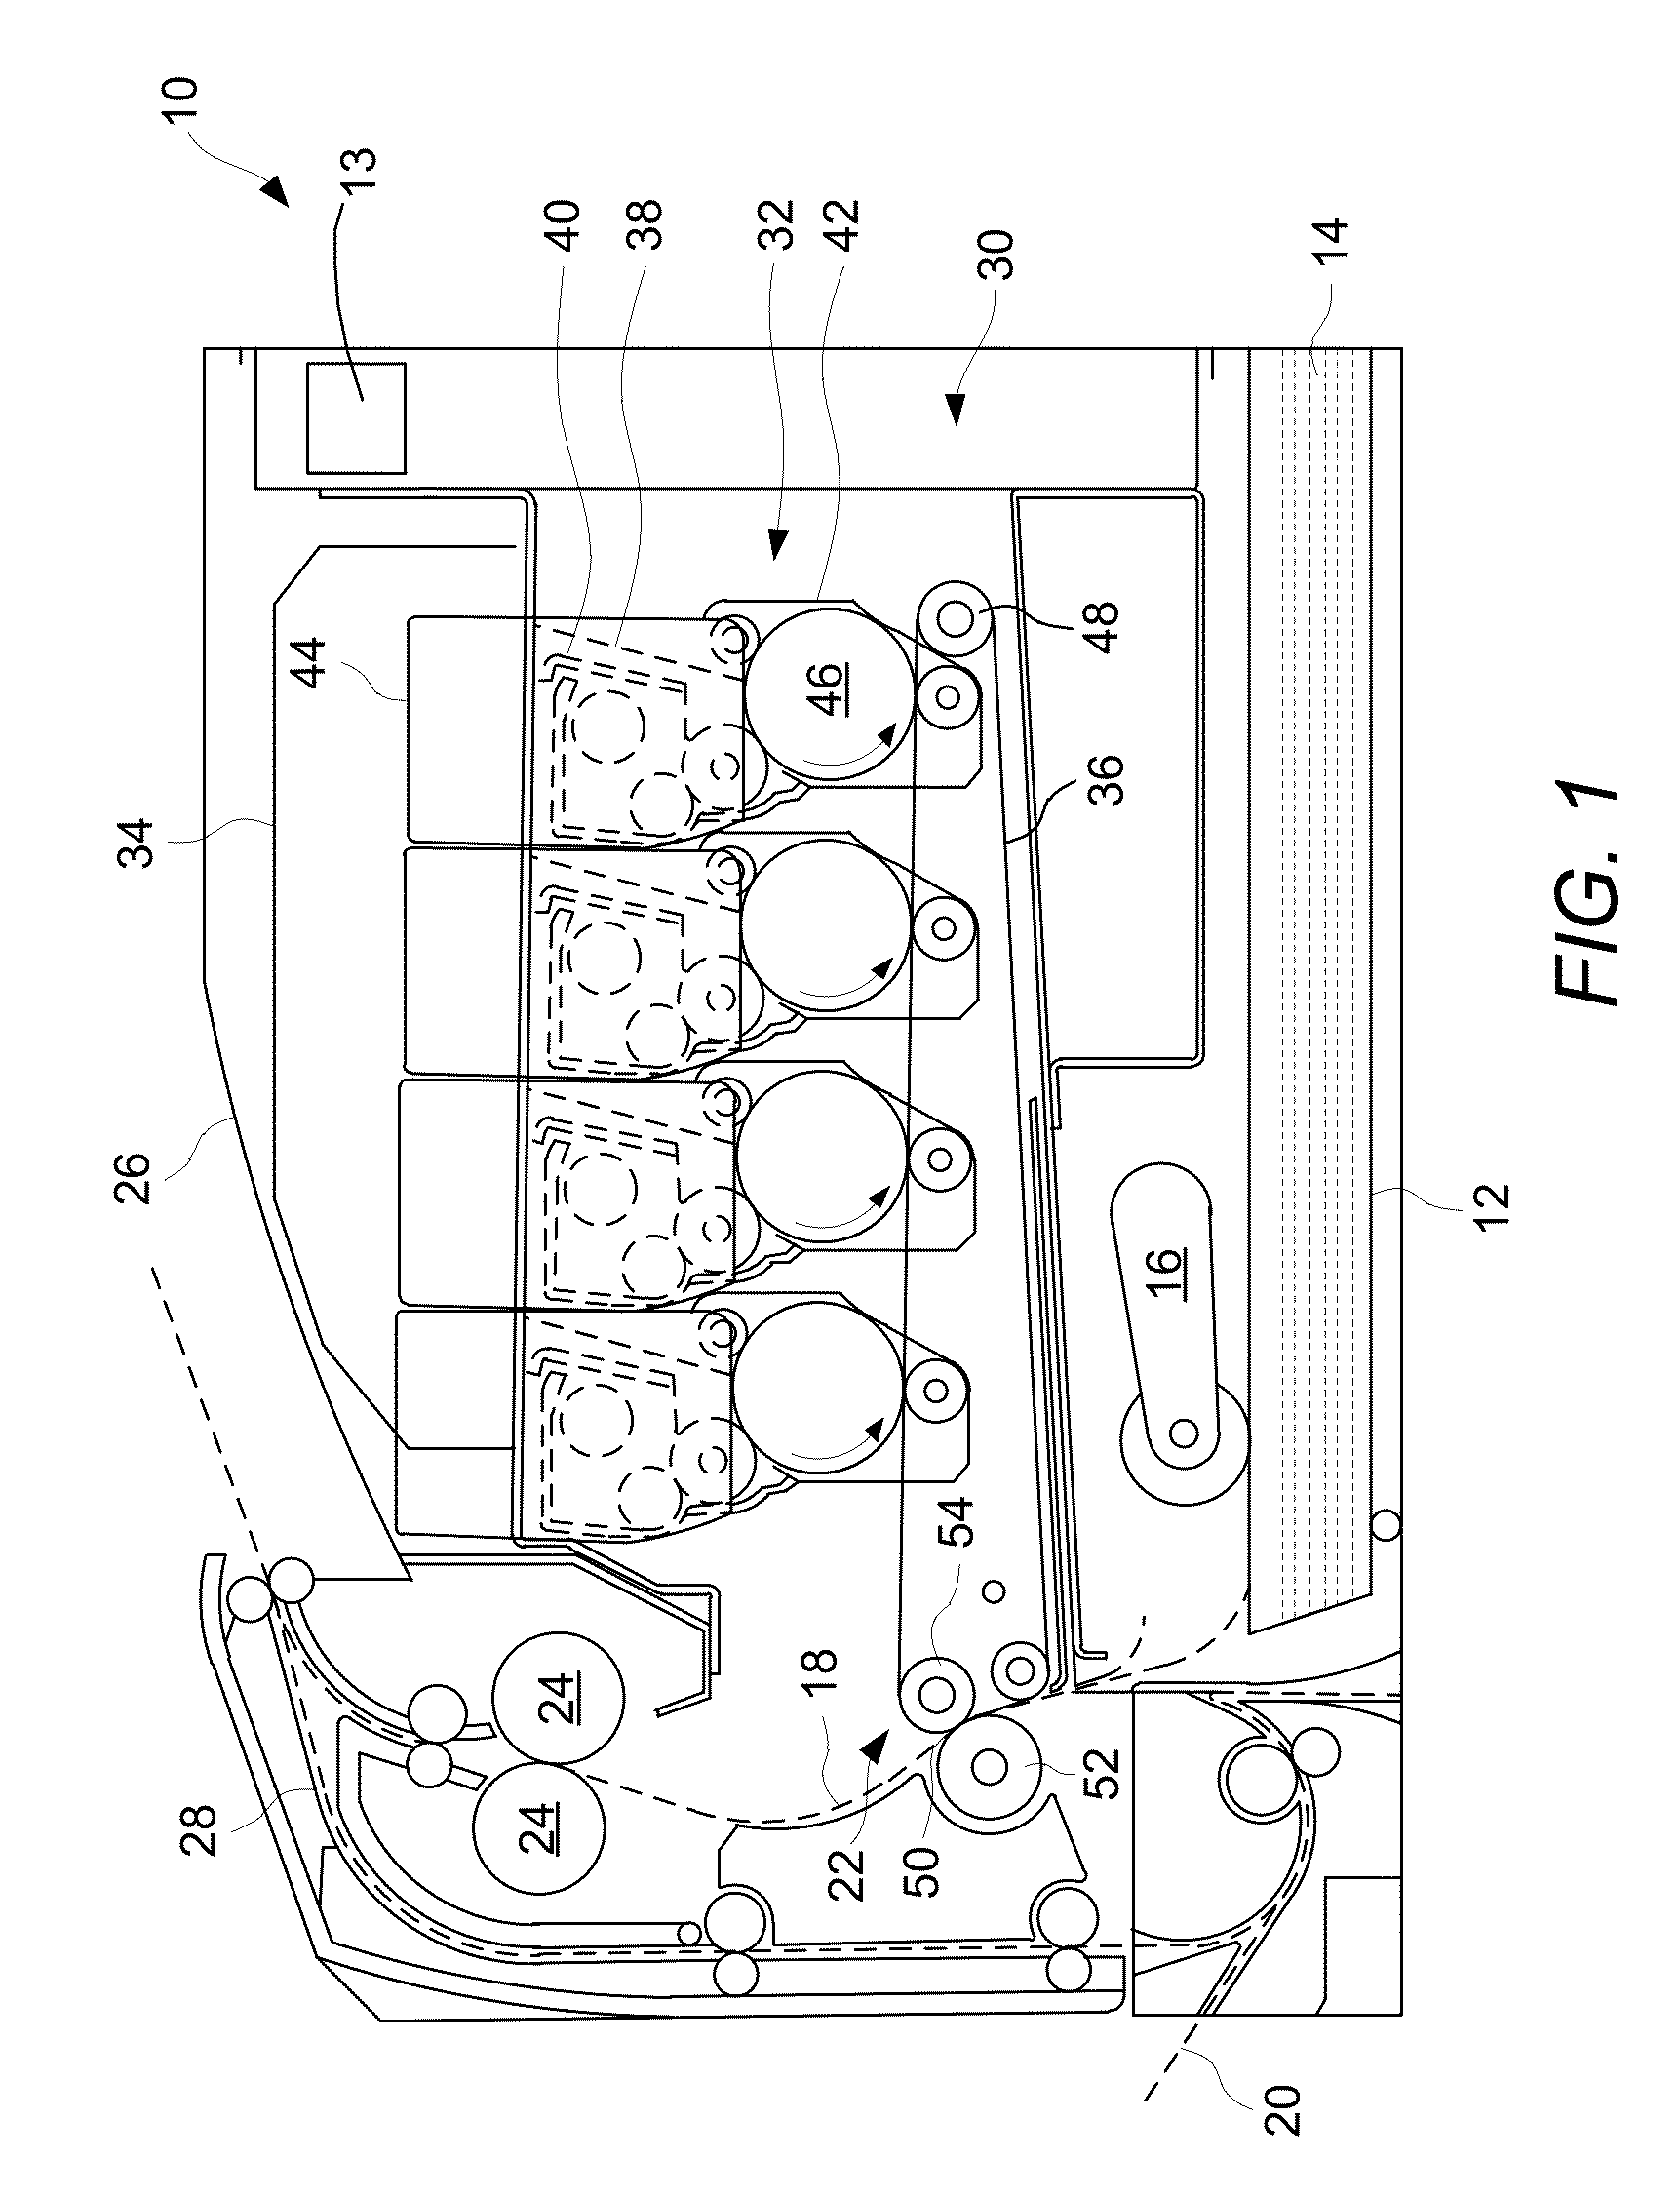 Laser Scan Unit Housing for an Imaging Device